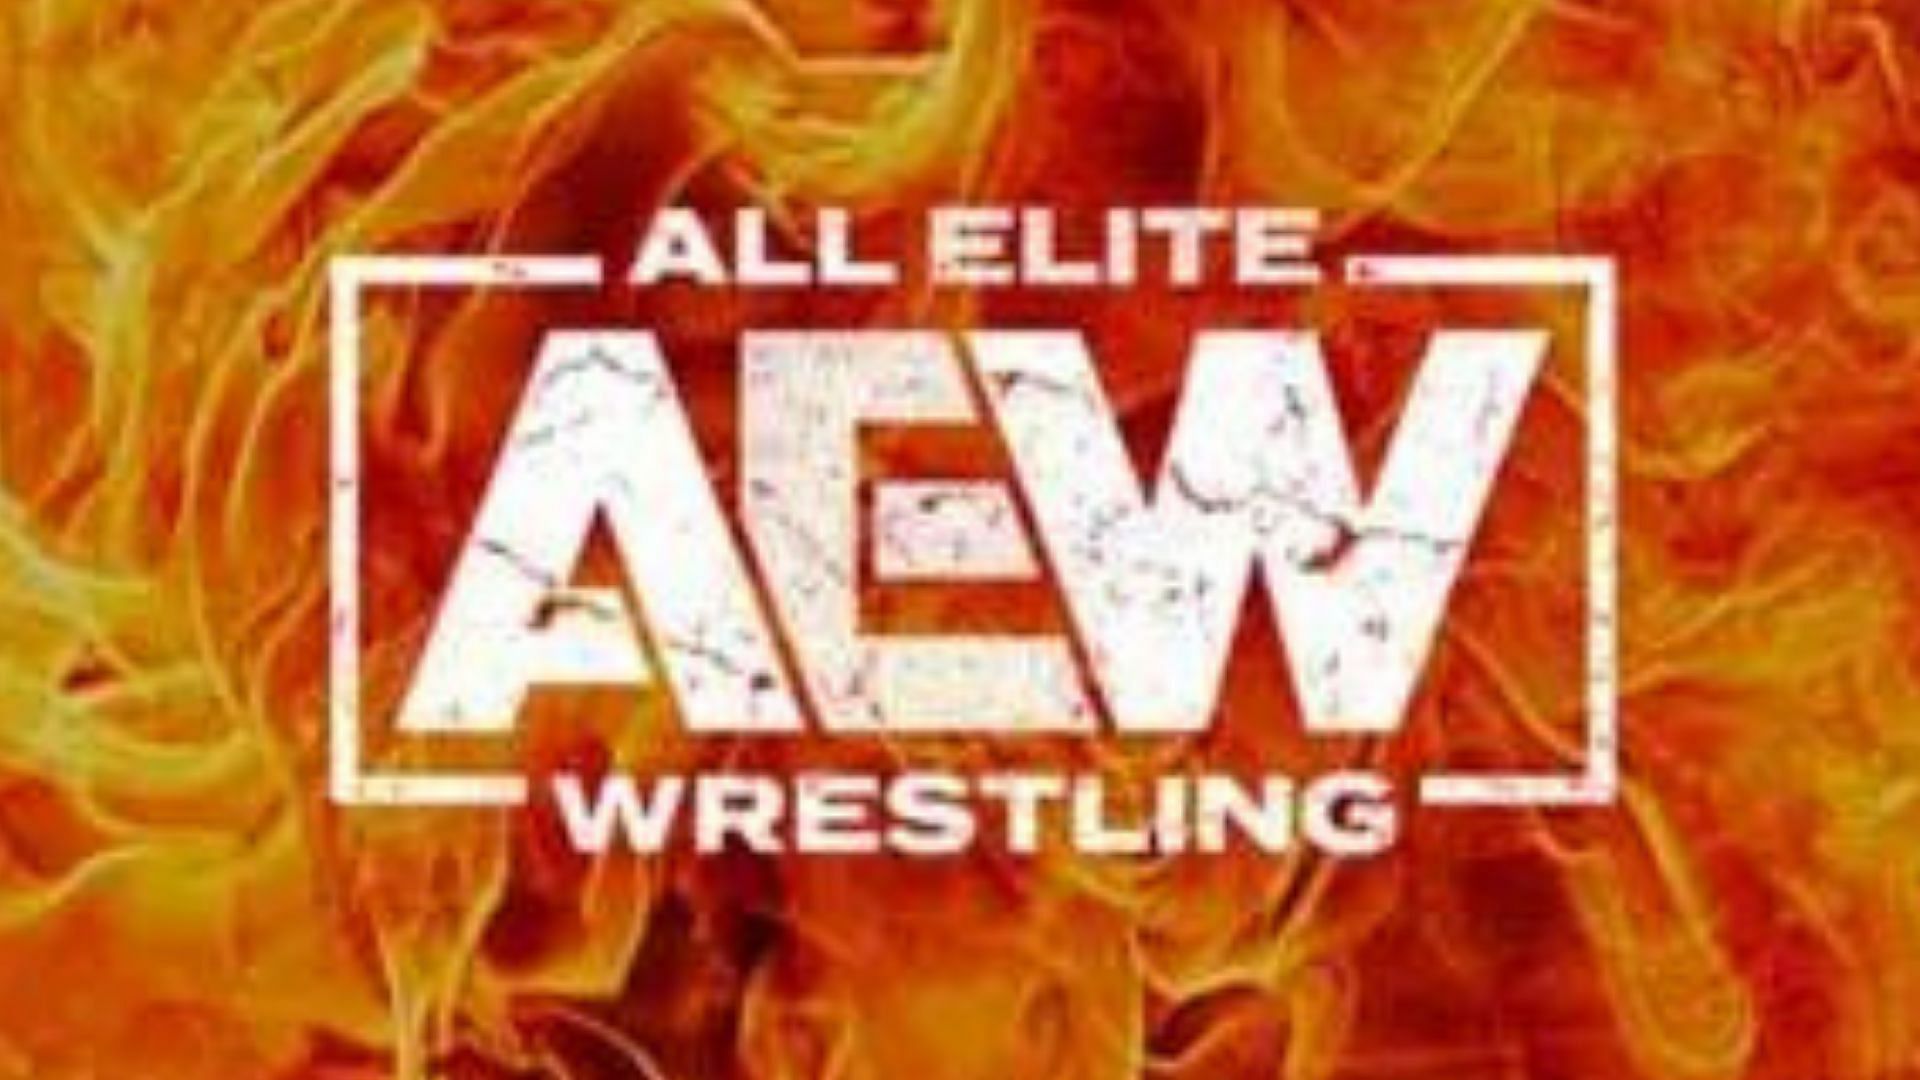 Which AEW star wants to burn the company to the ground?